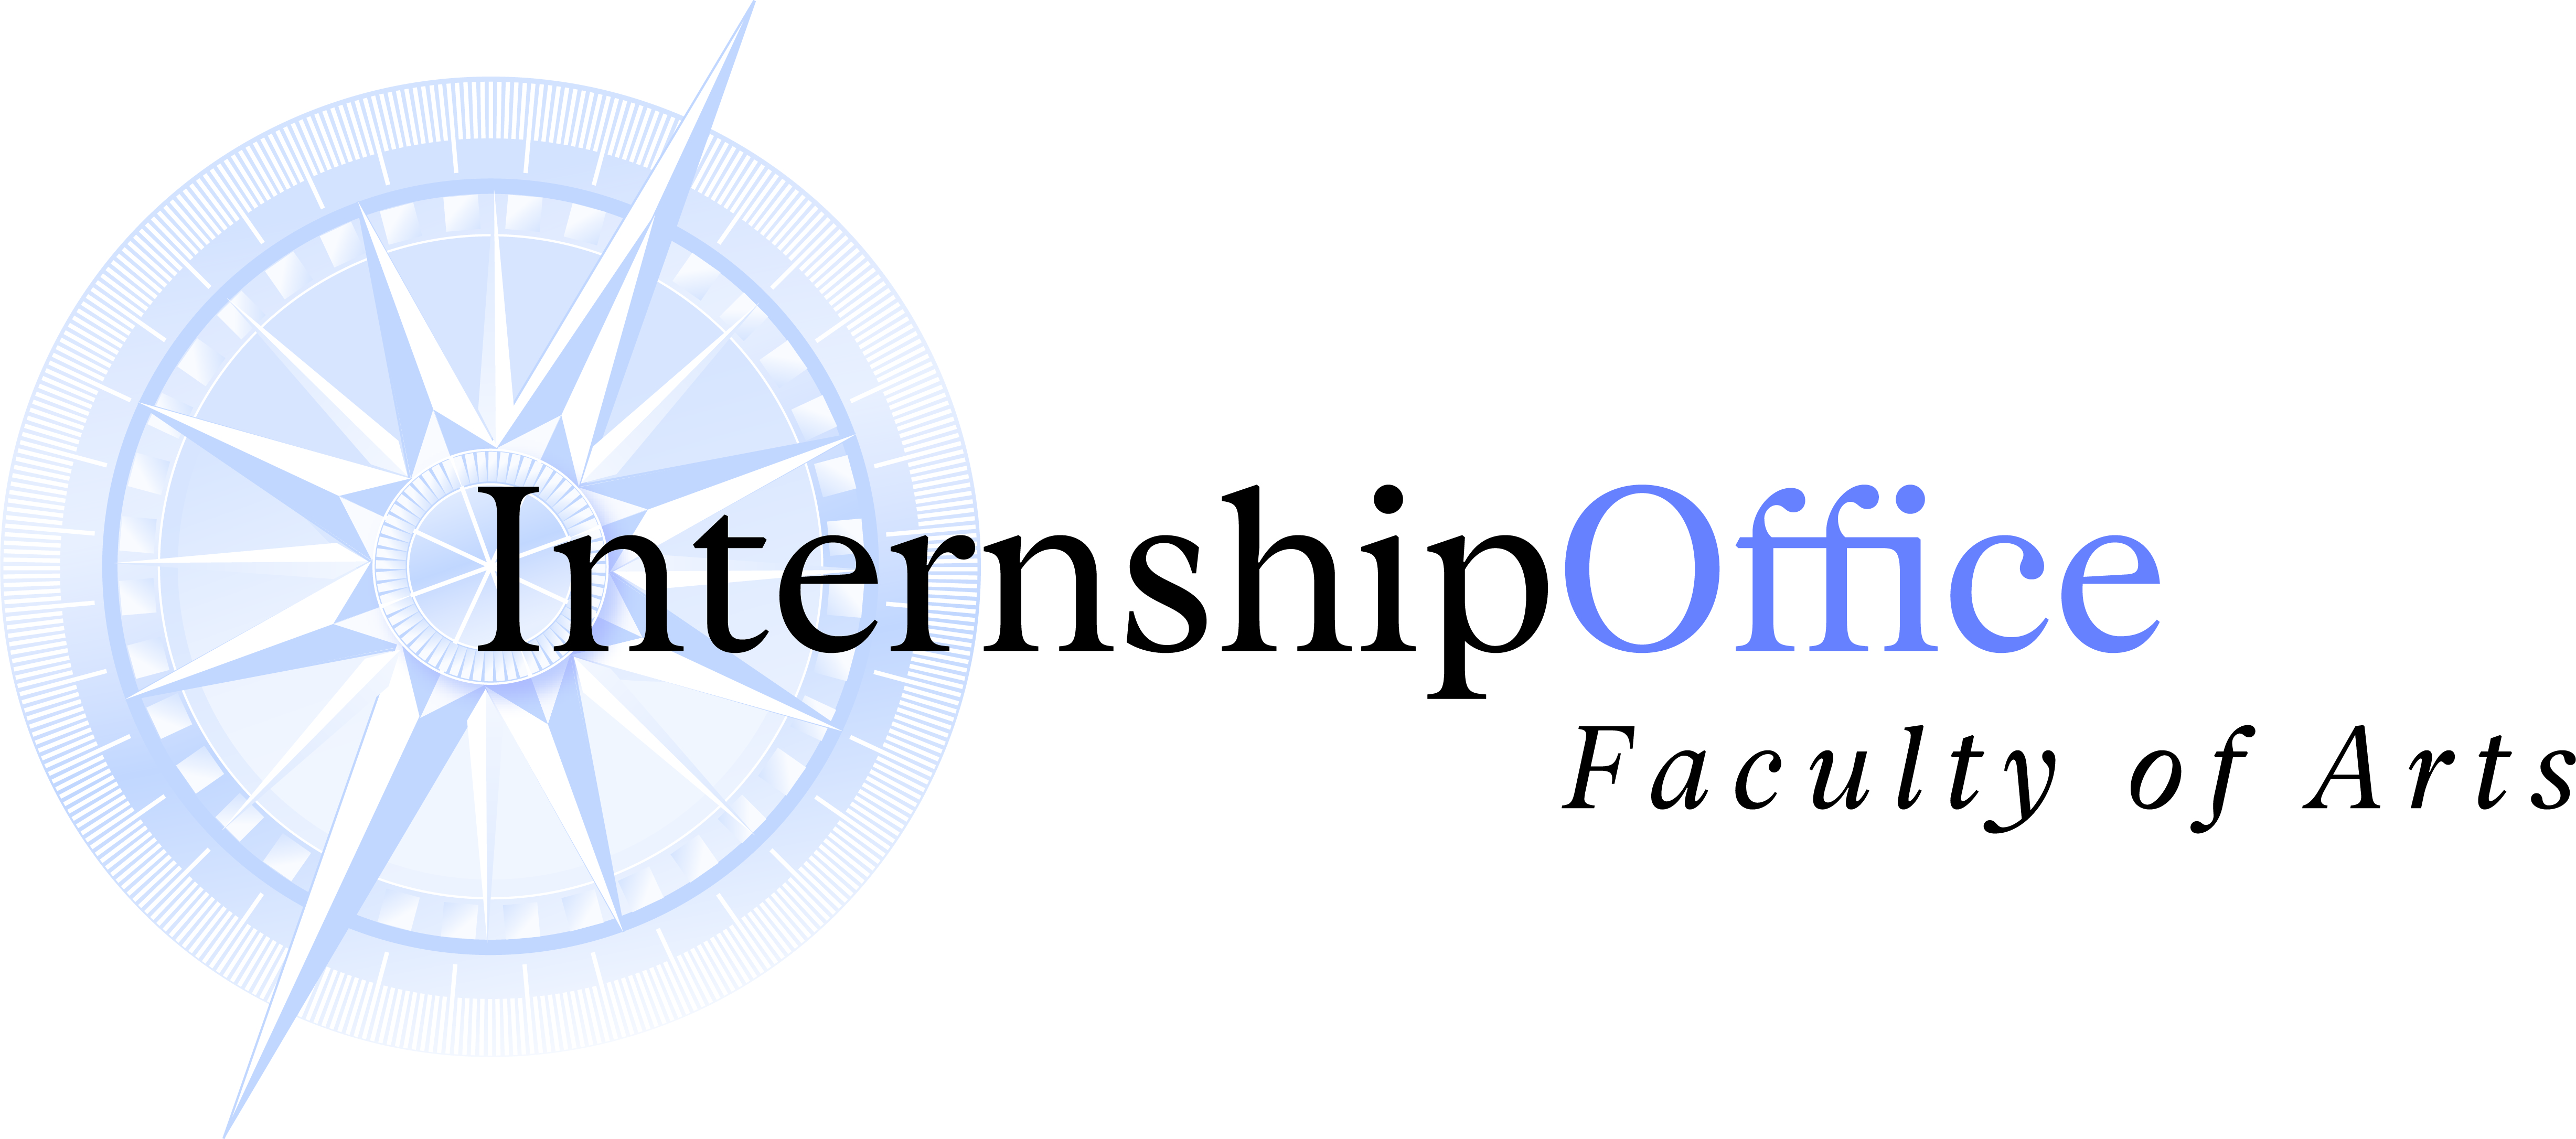 A logo of the Arts Internship Office, showing a blue compass in the background, and text in the forefront saying "Internship Office, Faculty of Arts"